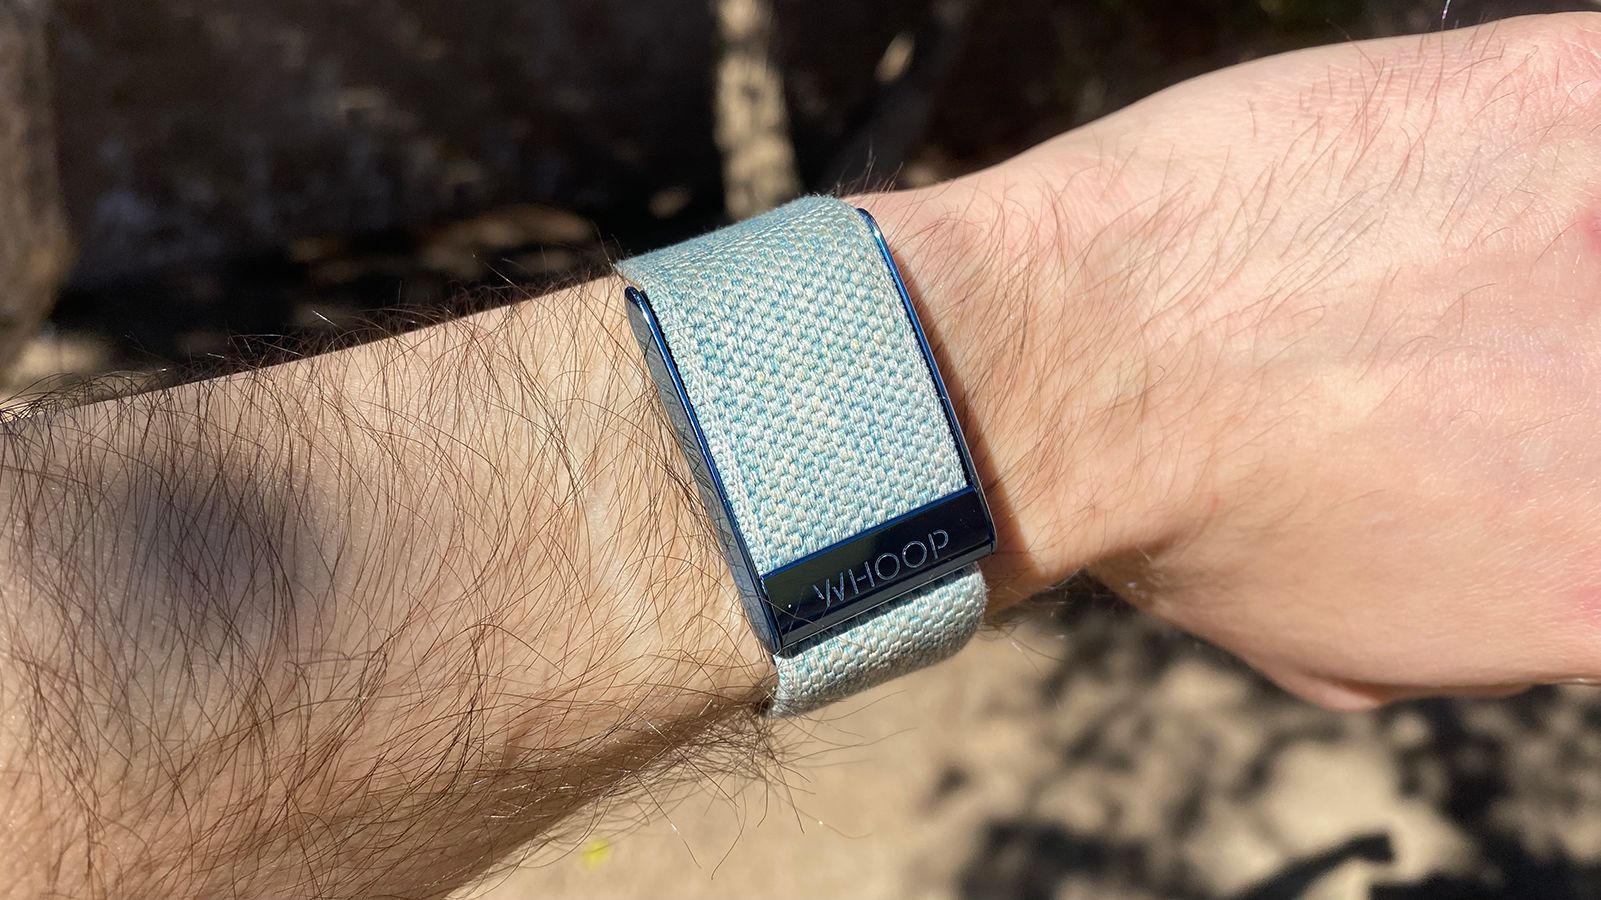 Whoop 4.0 review: The fitness tracker you need to take your resolutions seriously